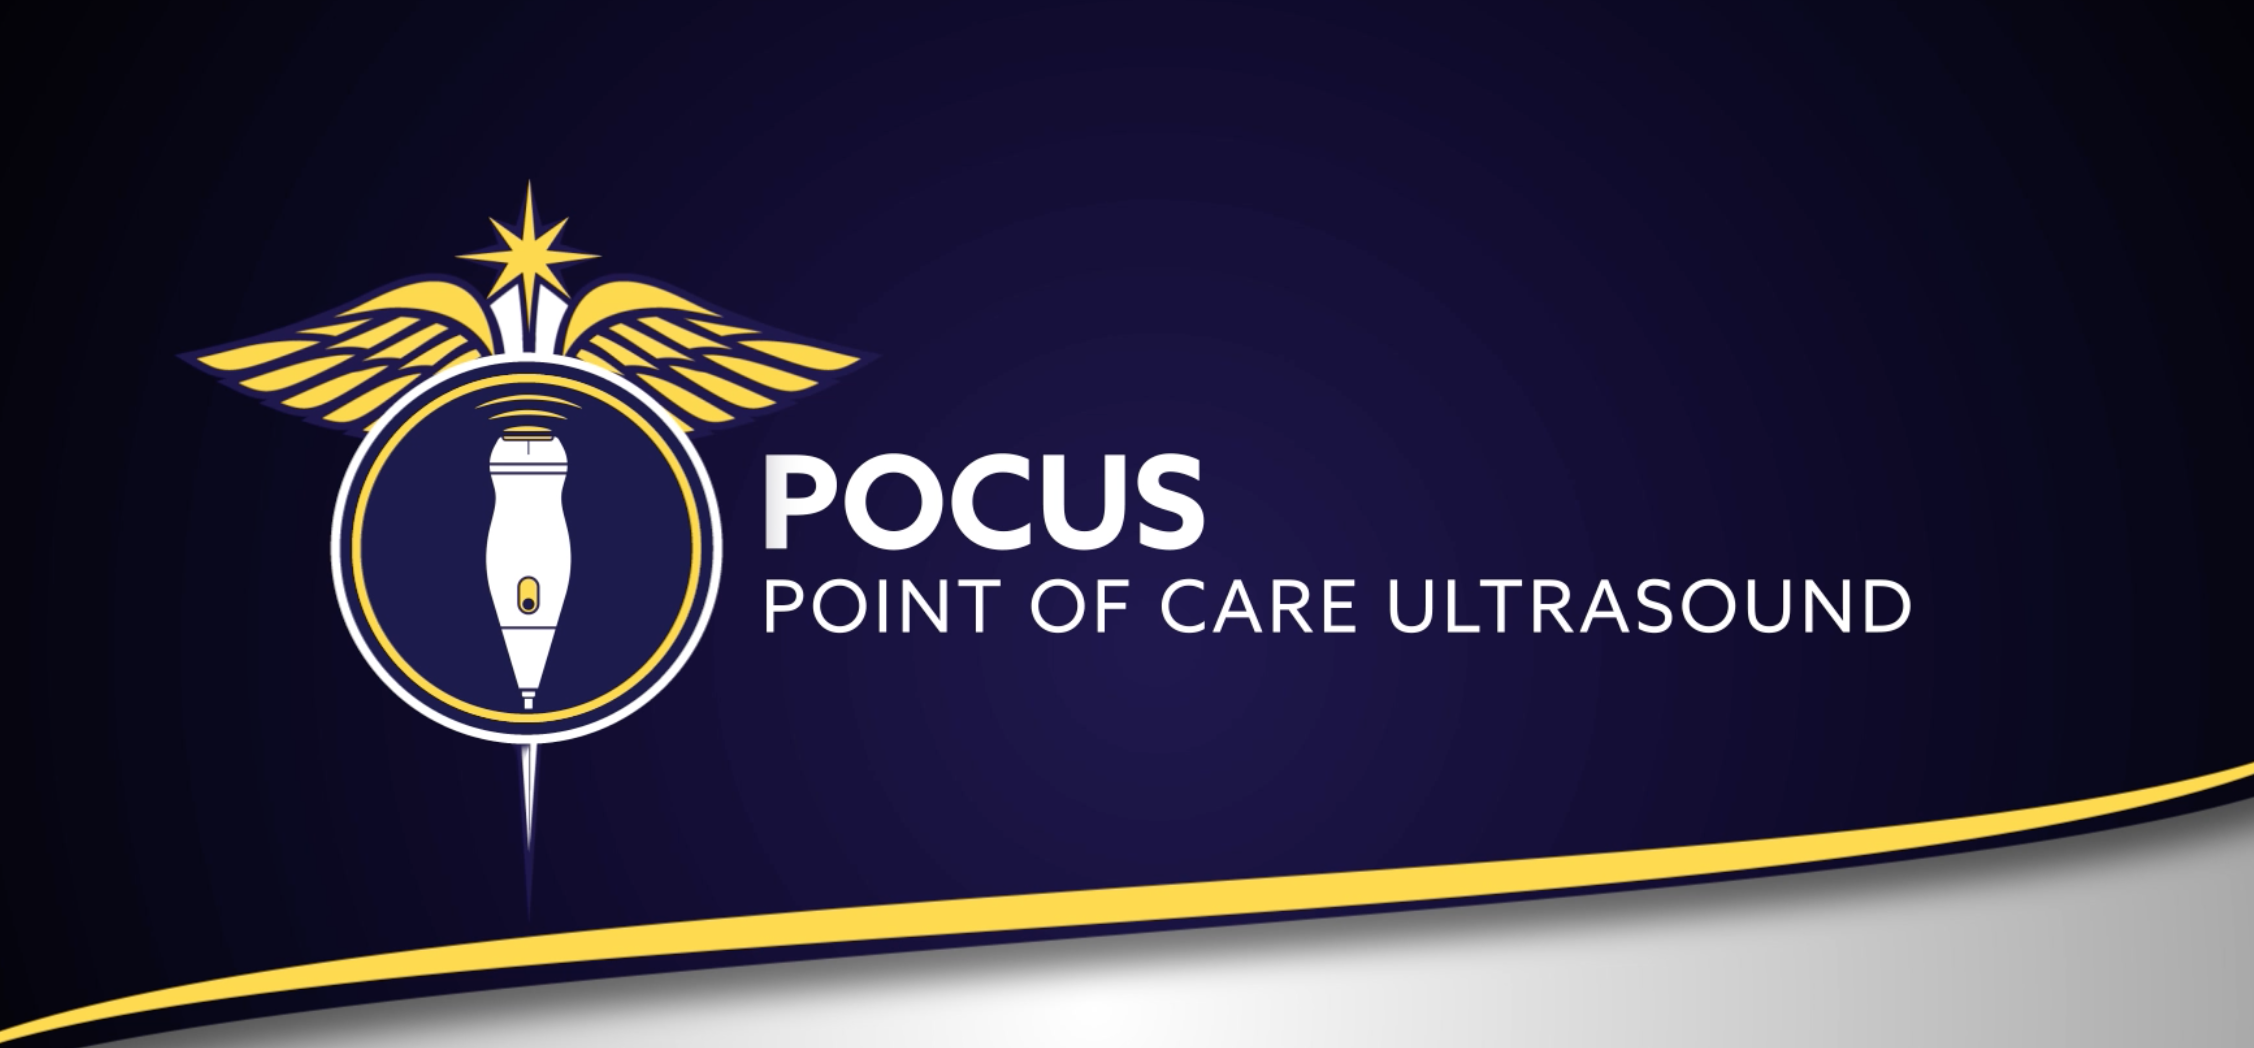 Introduction to Point of Care Ultrasound